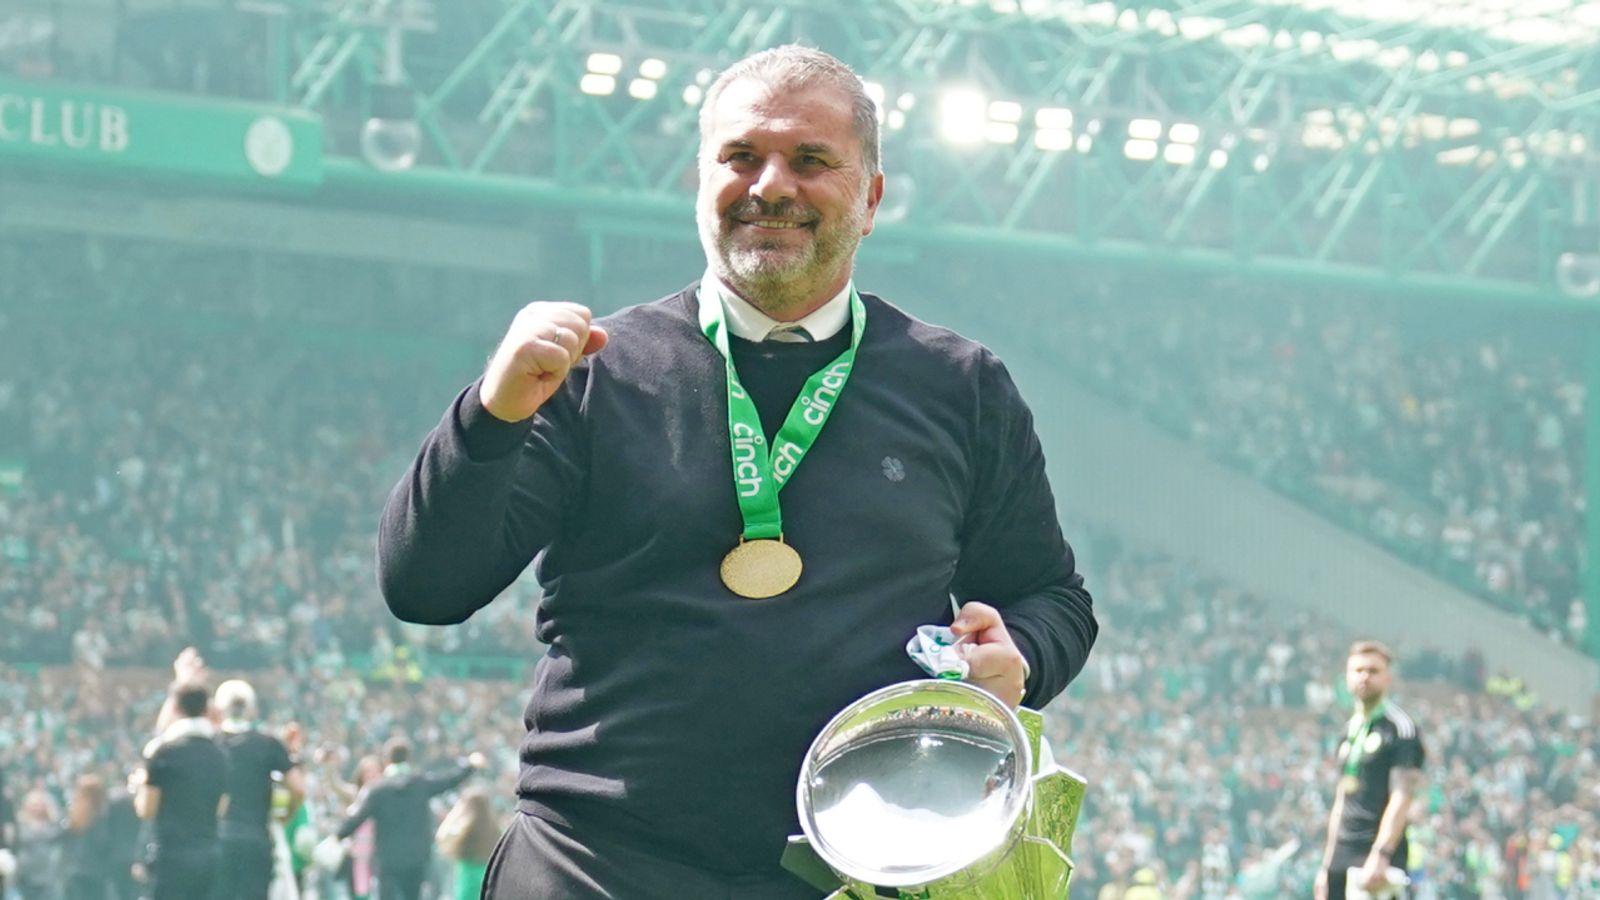 Celtic have received a ‘big bonus’ with automatic Champions League qualification says Andy Walker